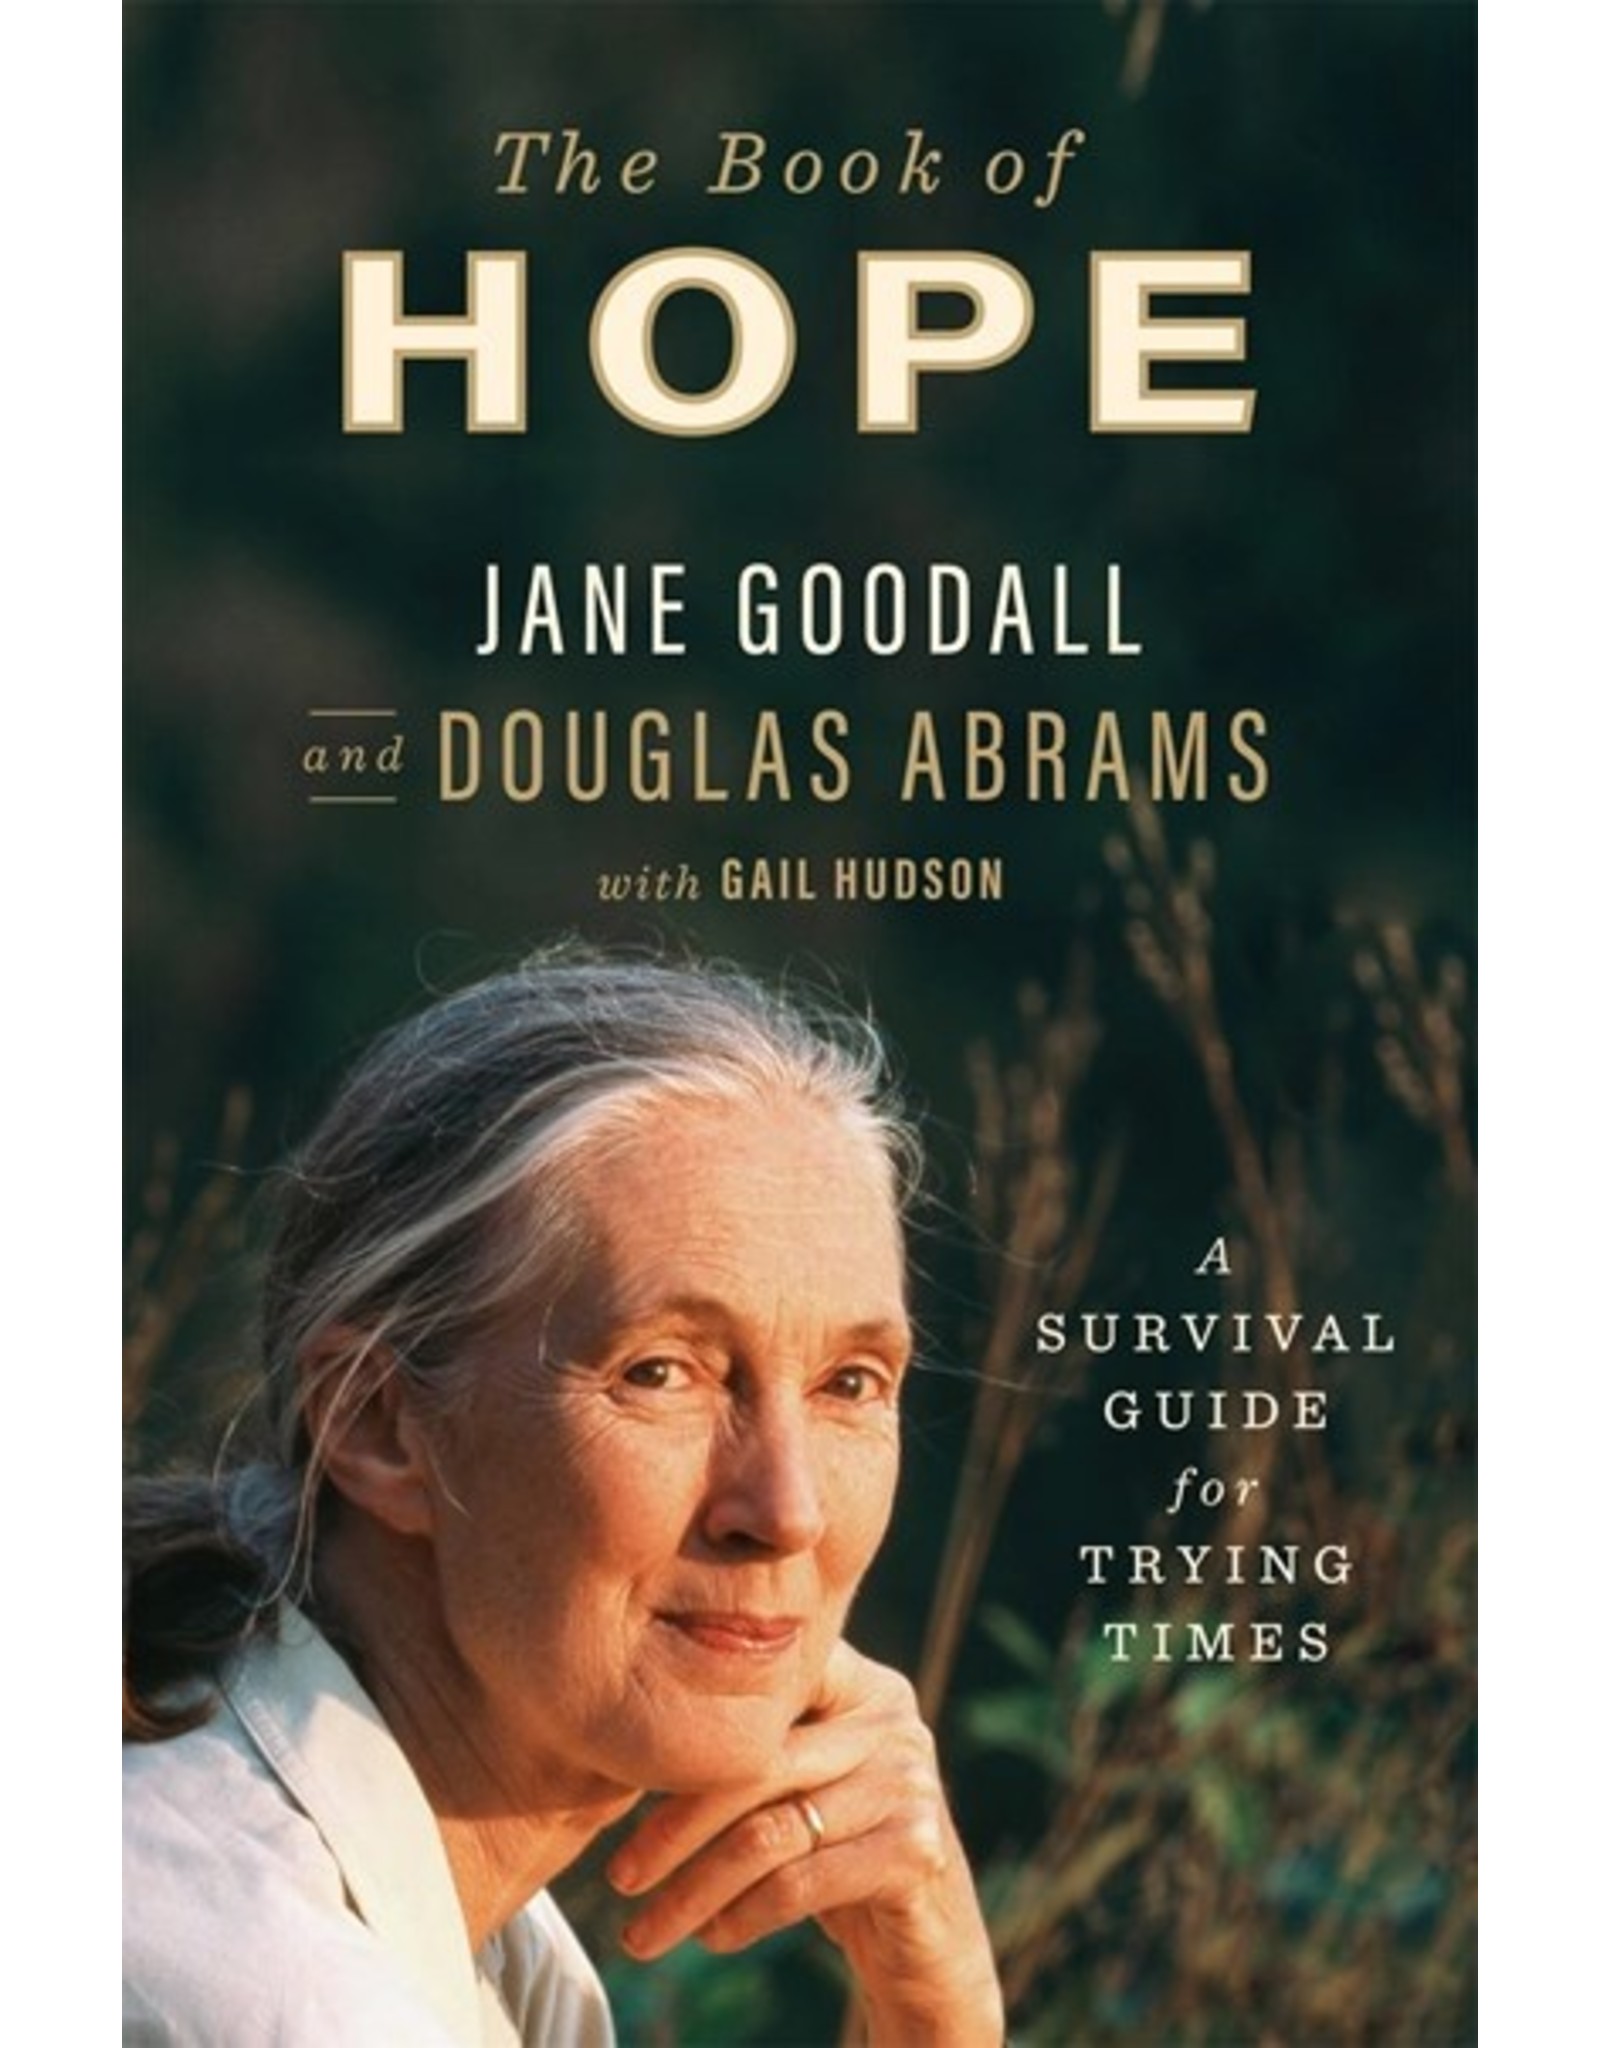 Books The Book of Hope : A Survival Guide for Trying Times by Jane Goodall and Douglas Abrams  with Gail Hudson